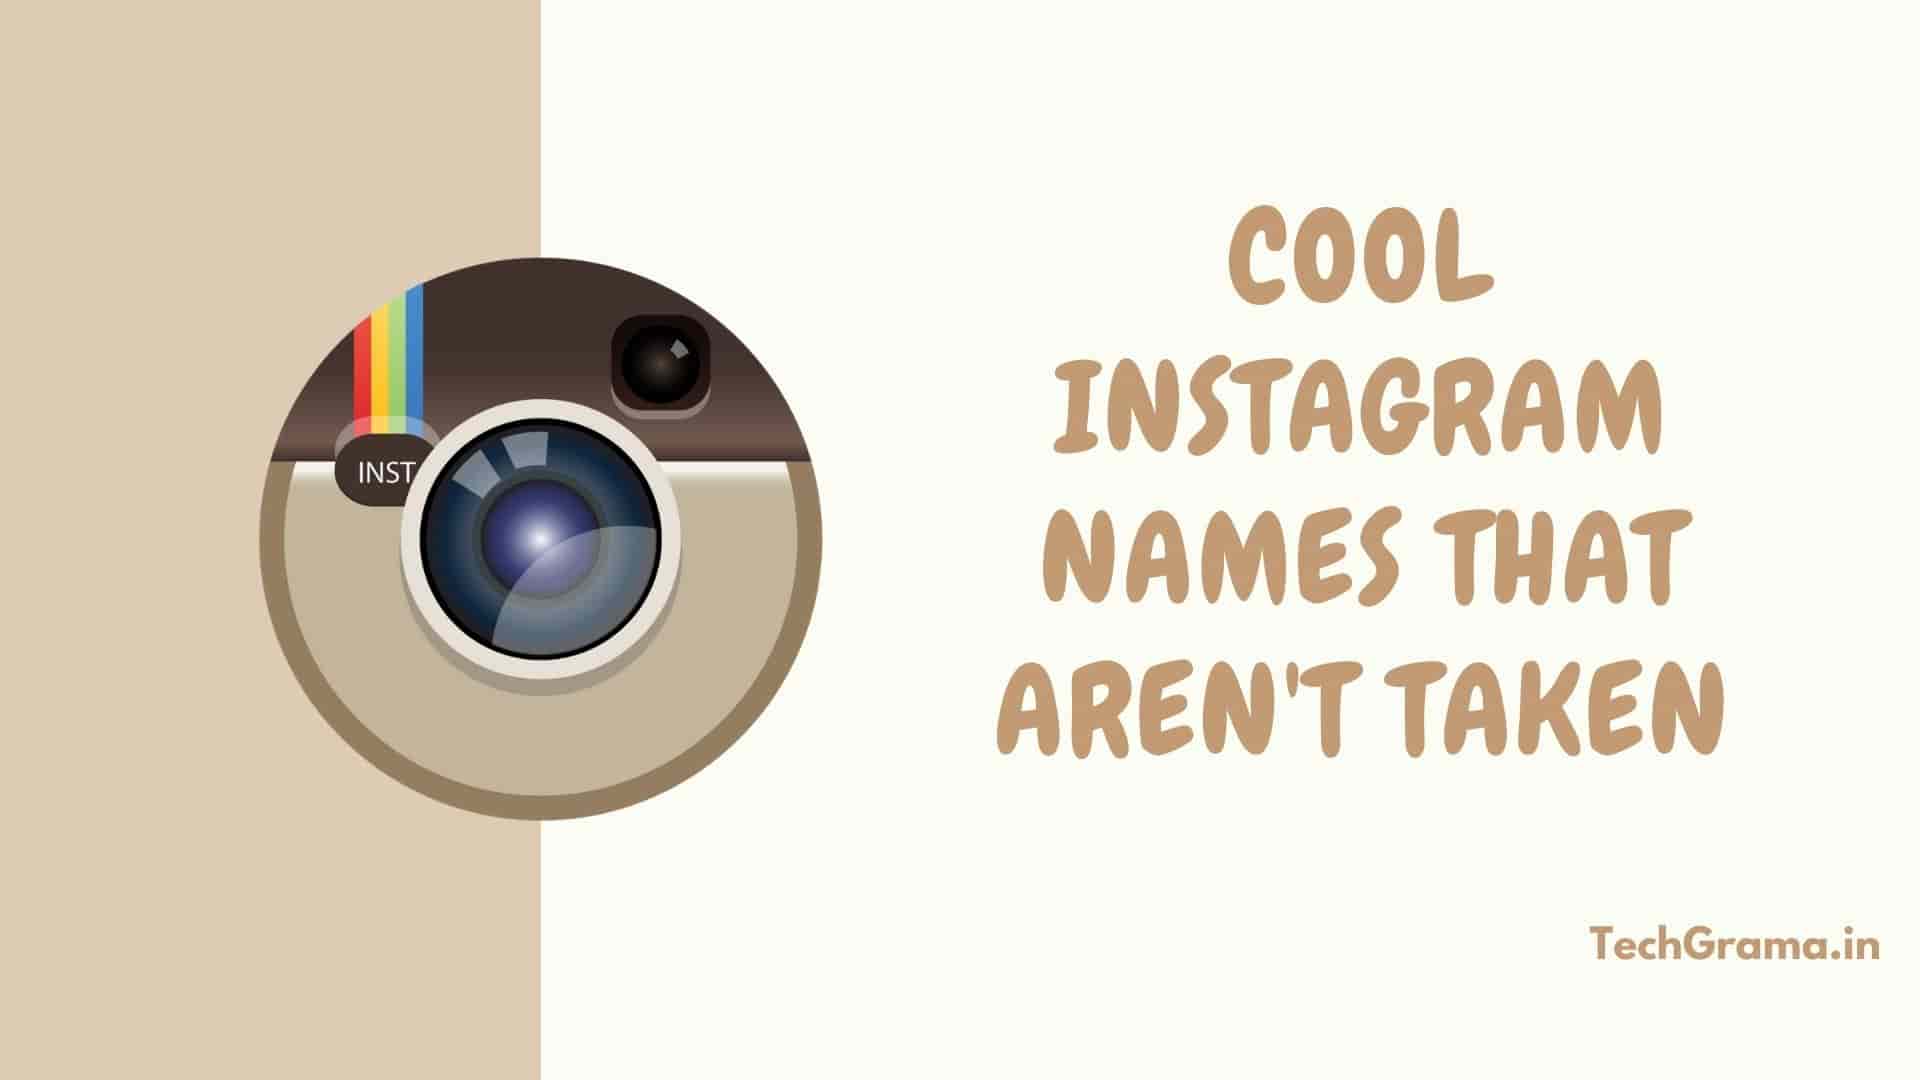 420 Latest Best Funny Sad Cool Instagram Names That Aren t. Source. www.tec...